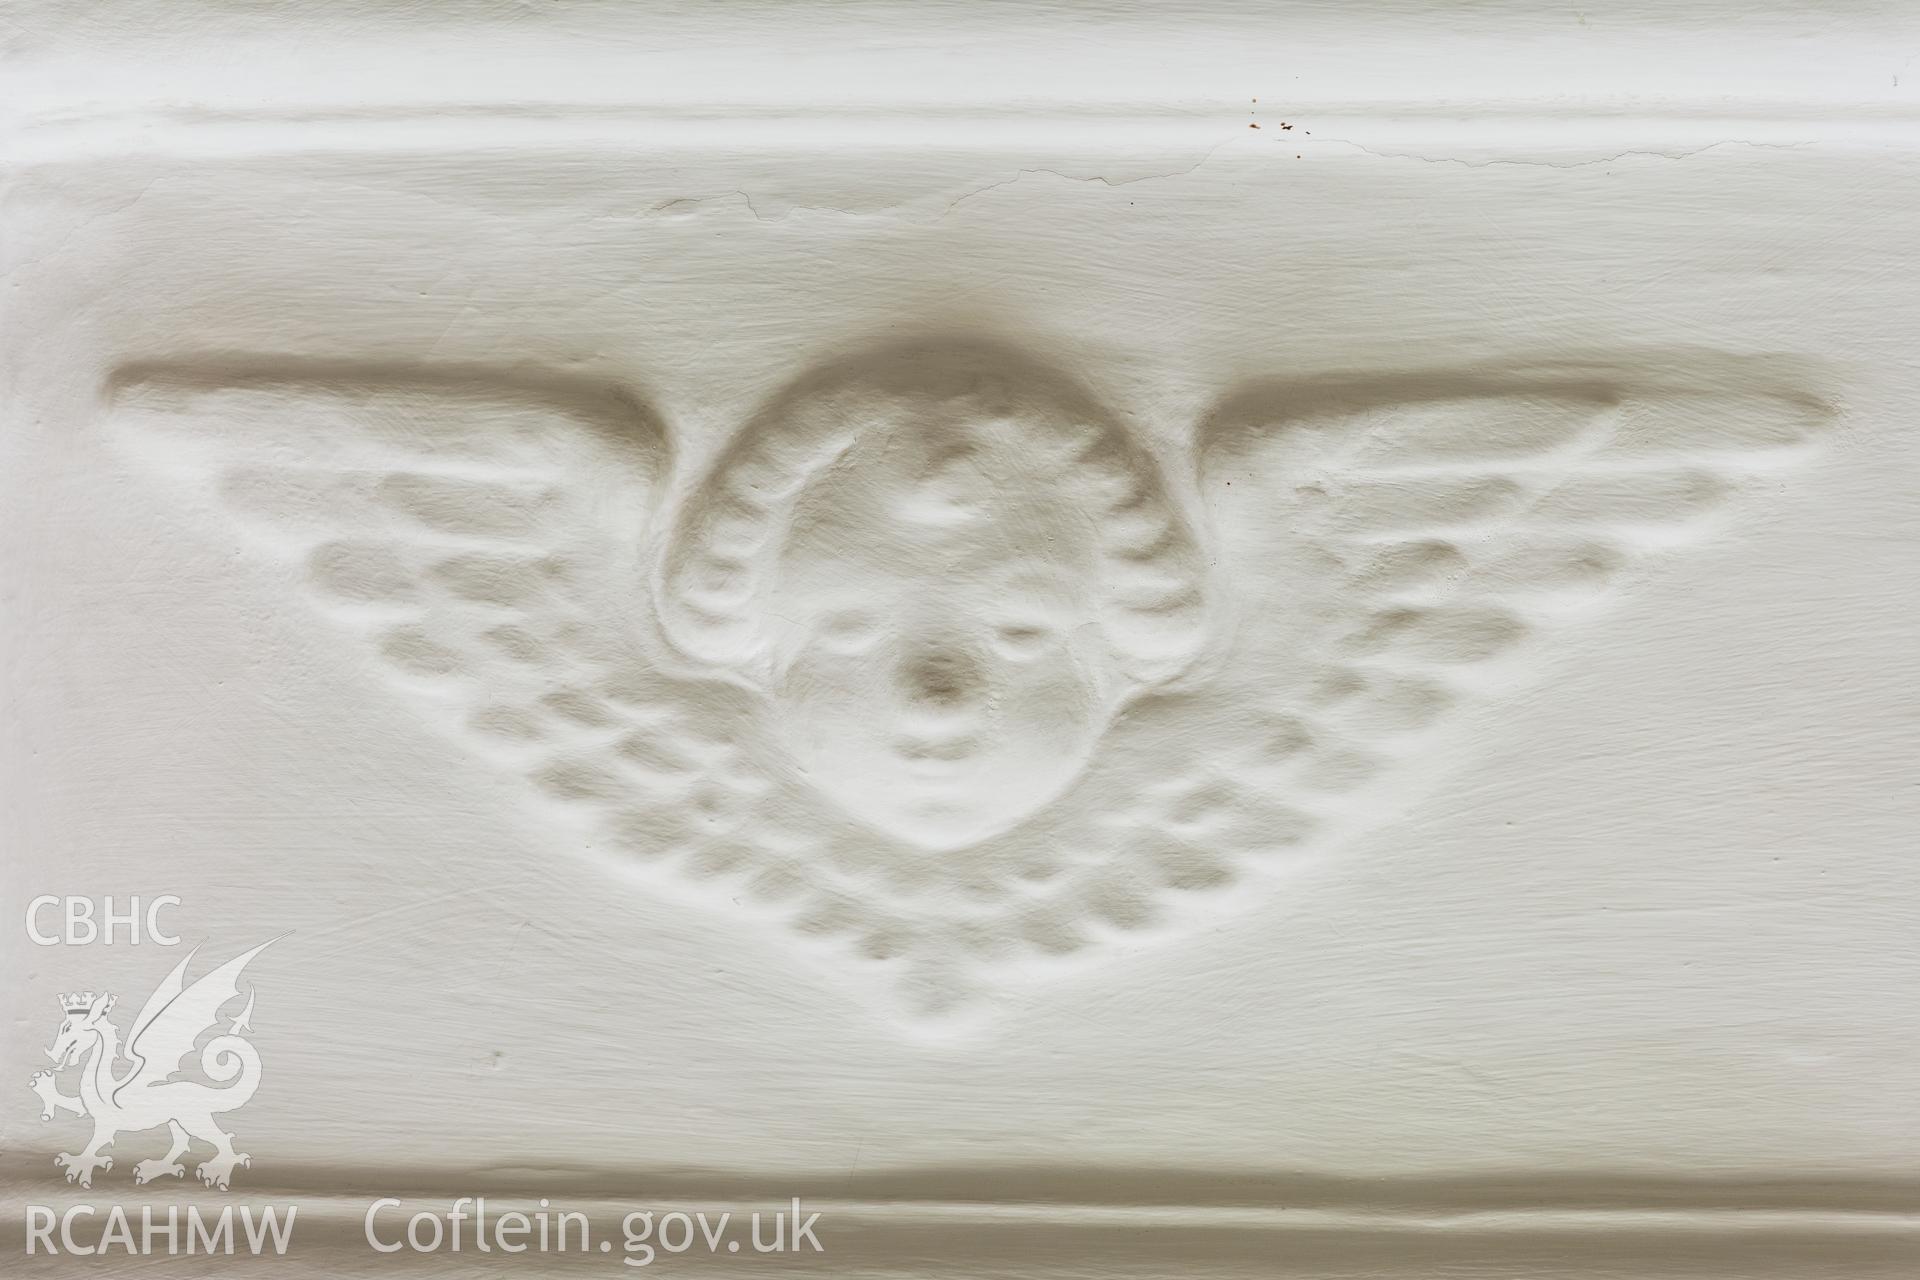 Interior view showing principal chamber ceiling detail, taken by Martin Crampin for RCAHMW 21st March 2017.